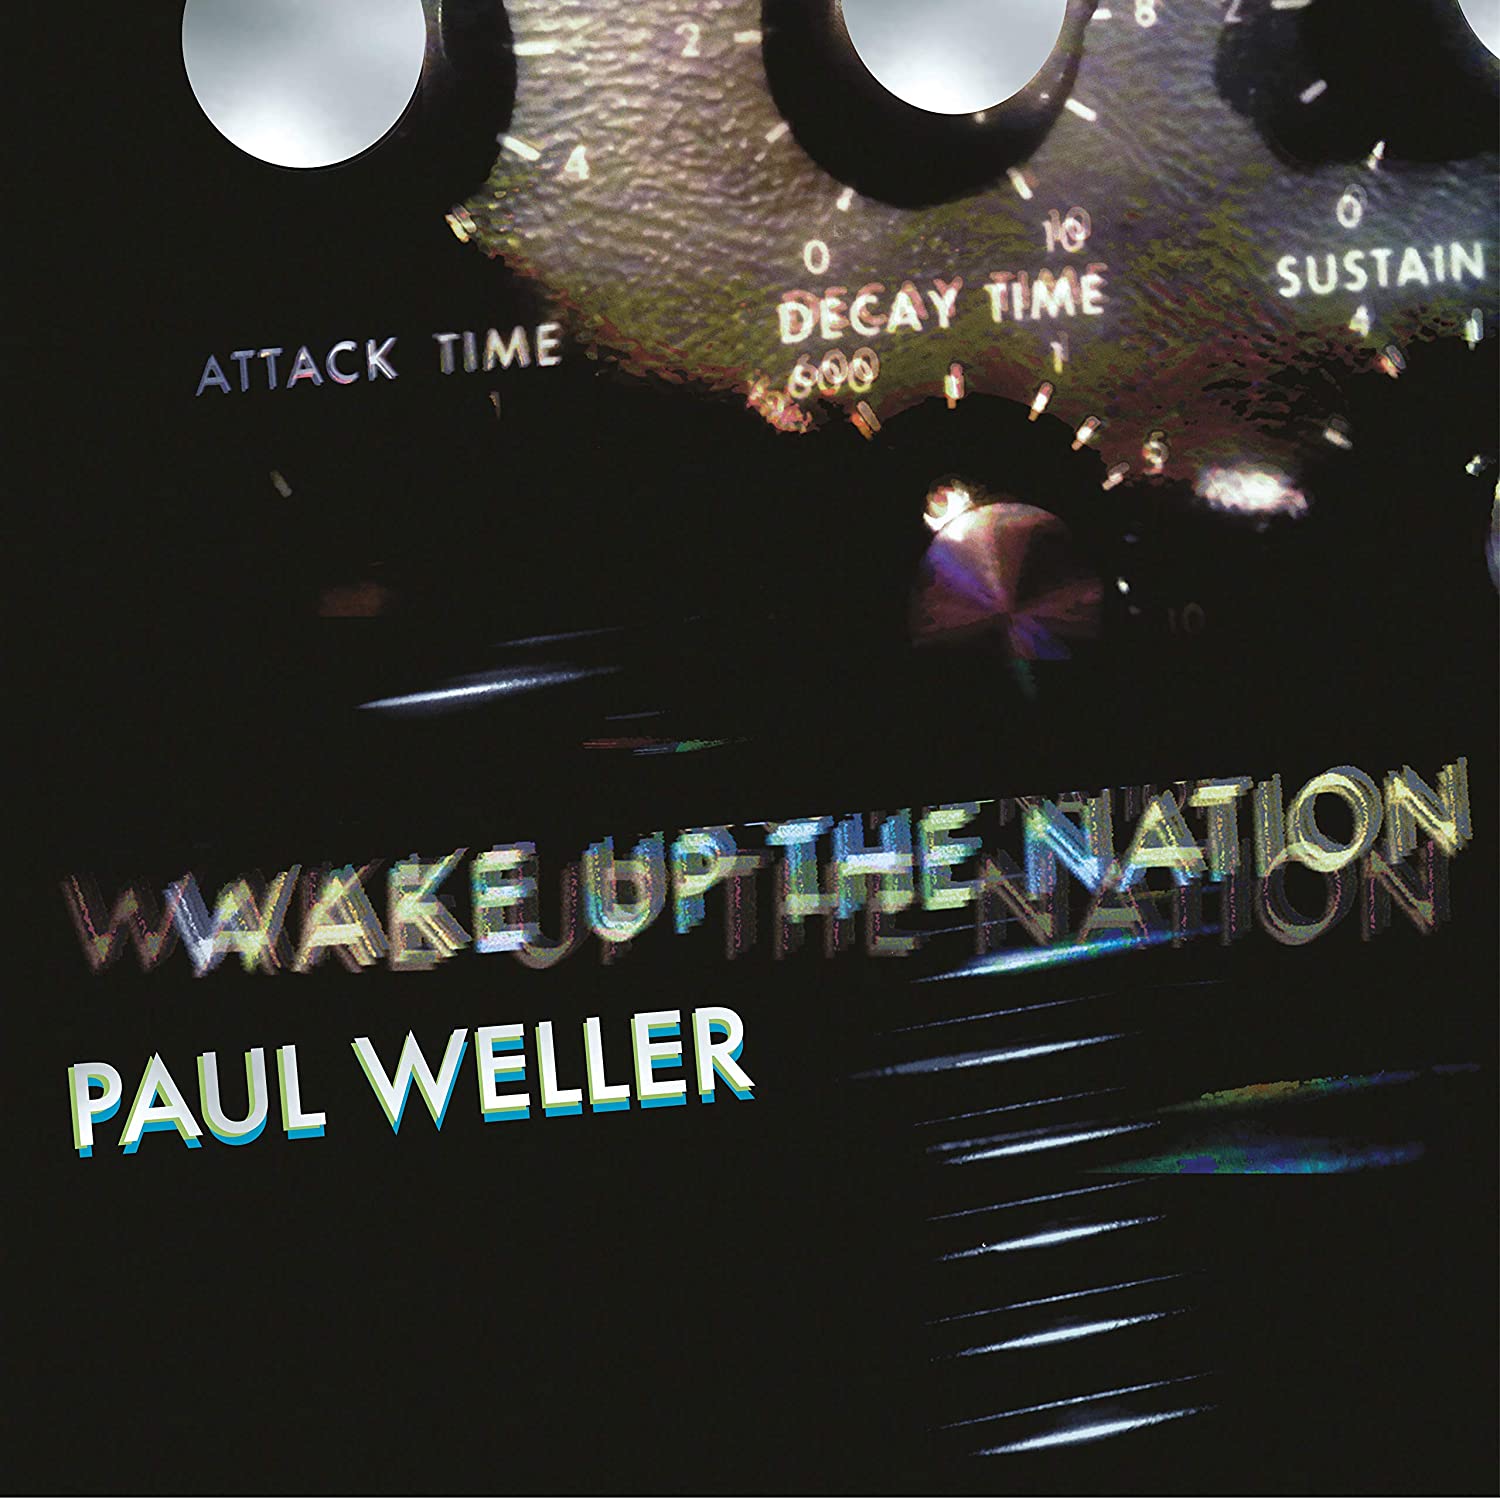 Paul Weller / Wake Up The Nation 10th anniversary remix